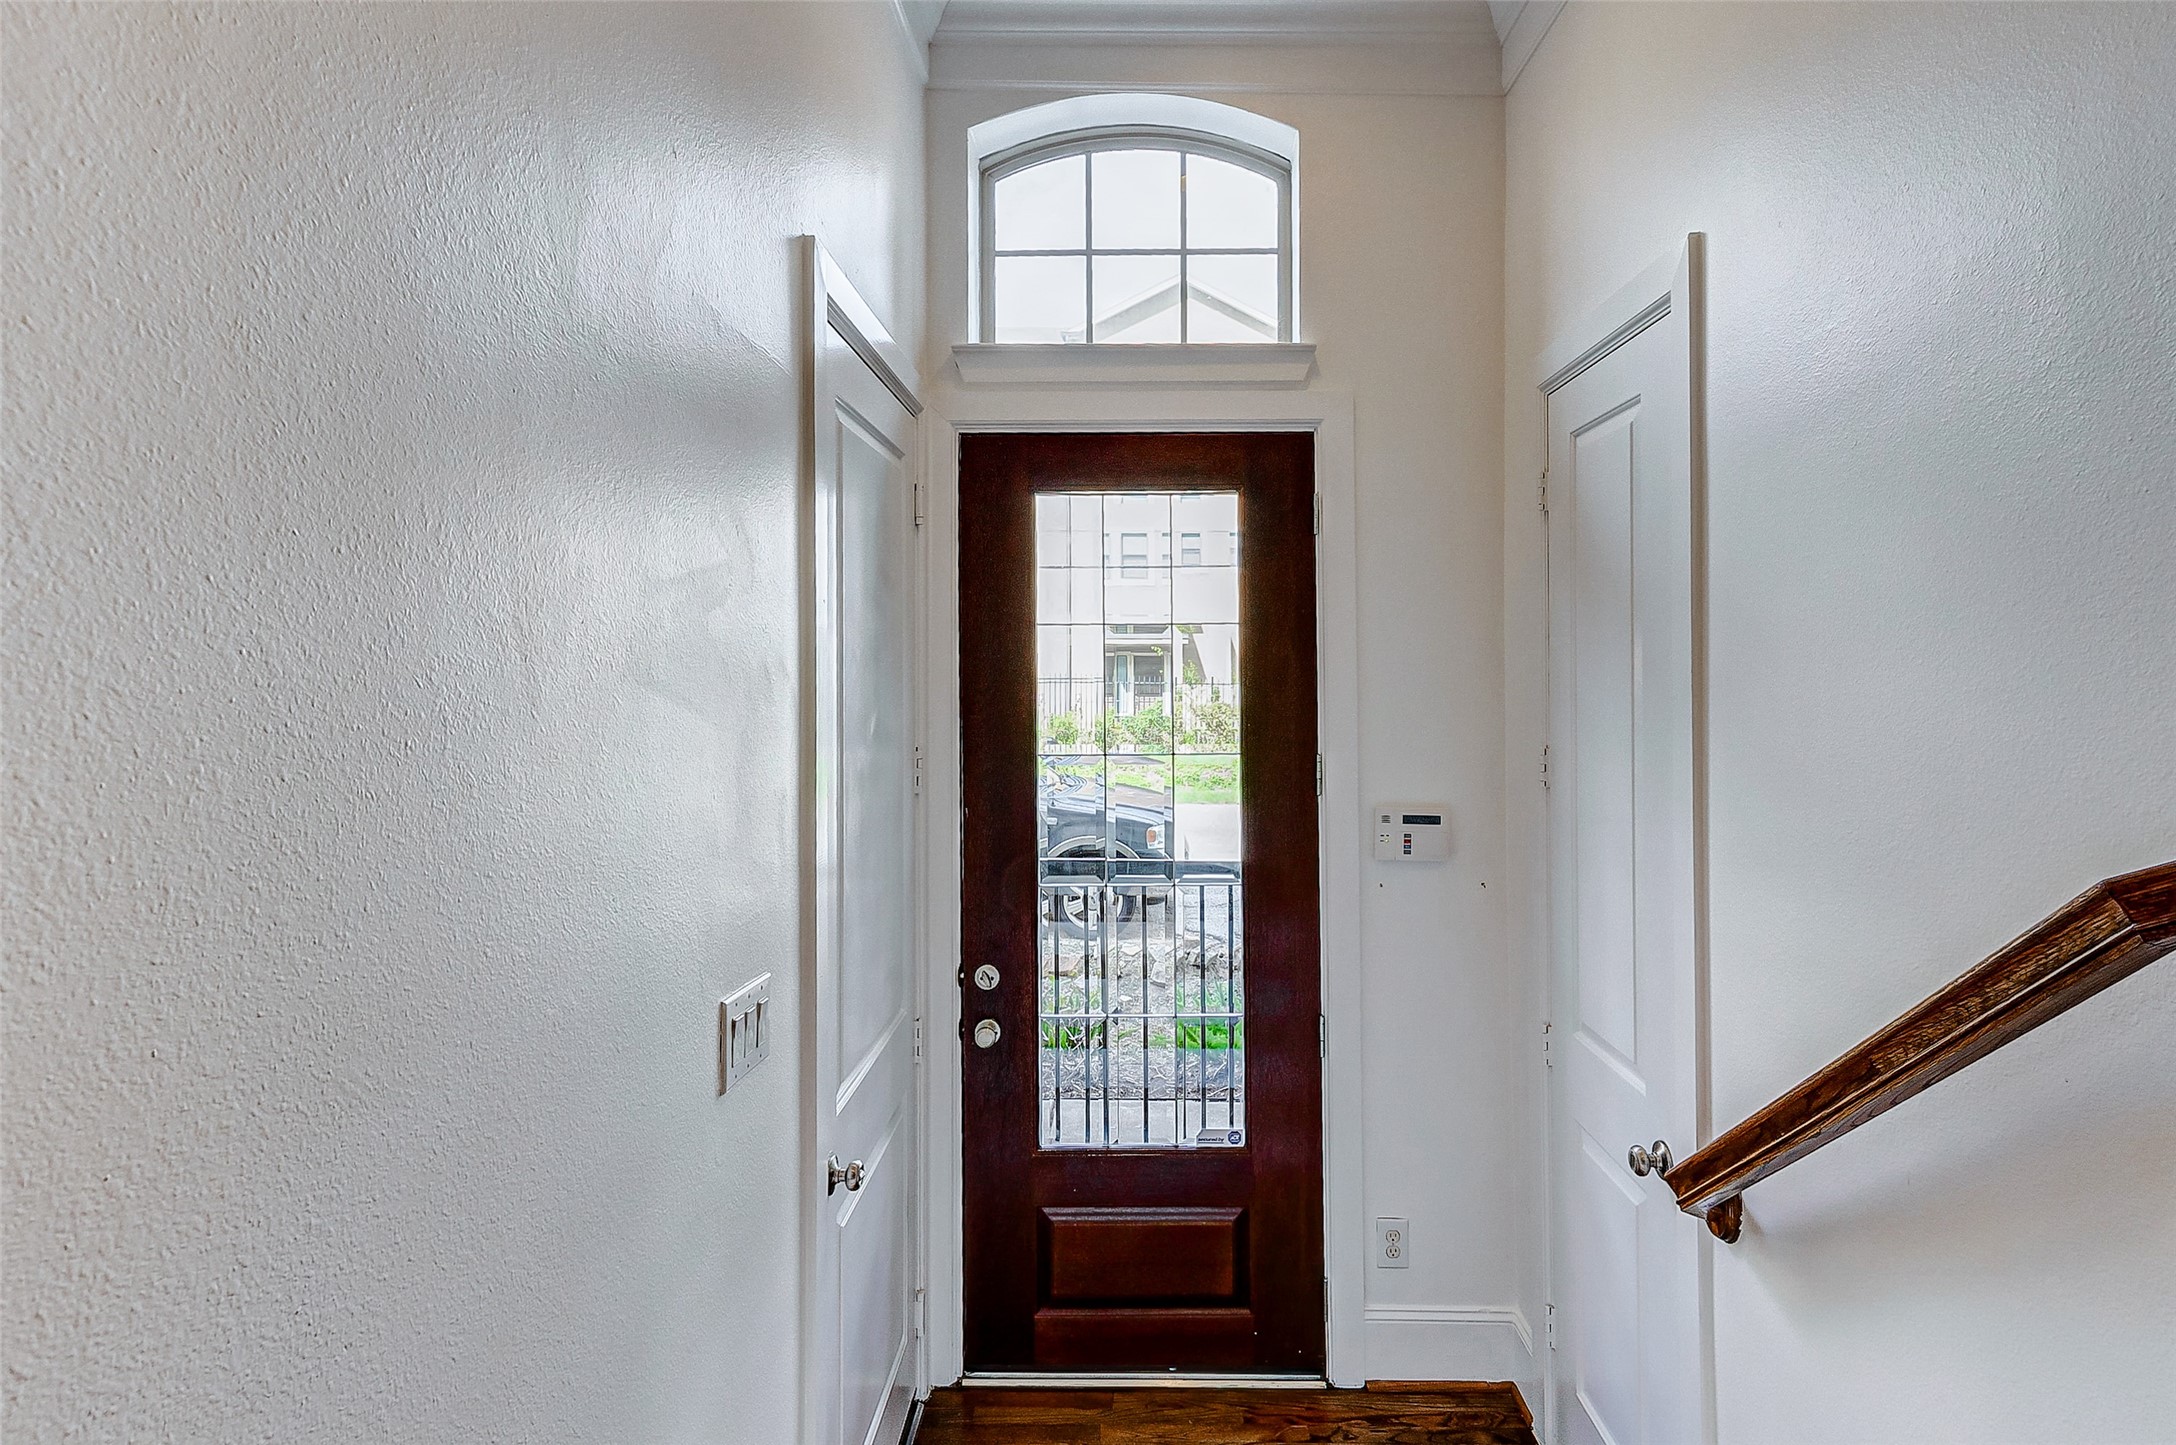 WELCOME HOME! Step inside and you will fall in love! The front foyer features tall ceilings, gorgeous wood flooring, crown-molding, and access into the 2-car attached garage and the first floor bedroom.